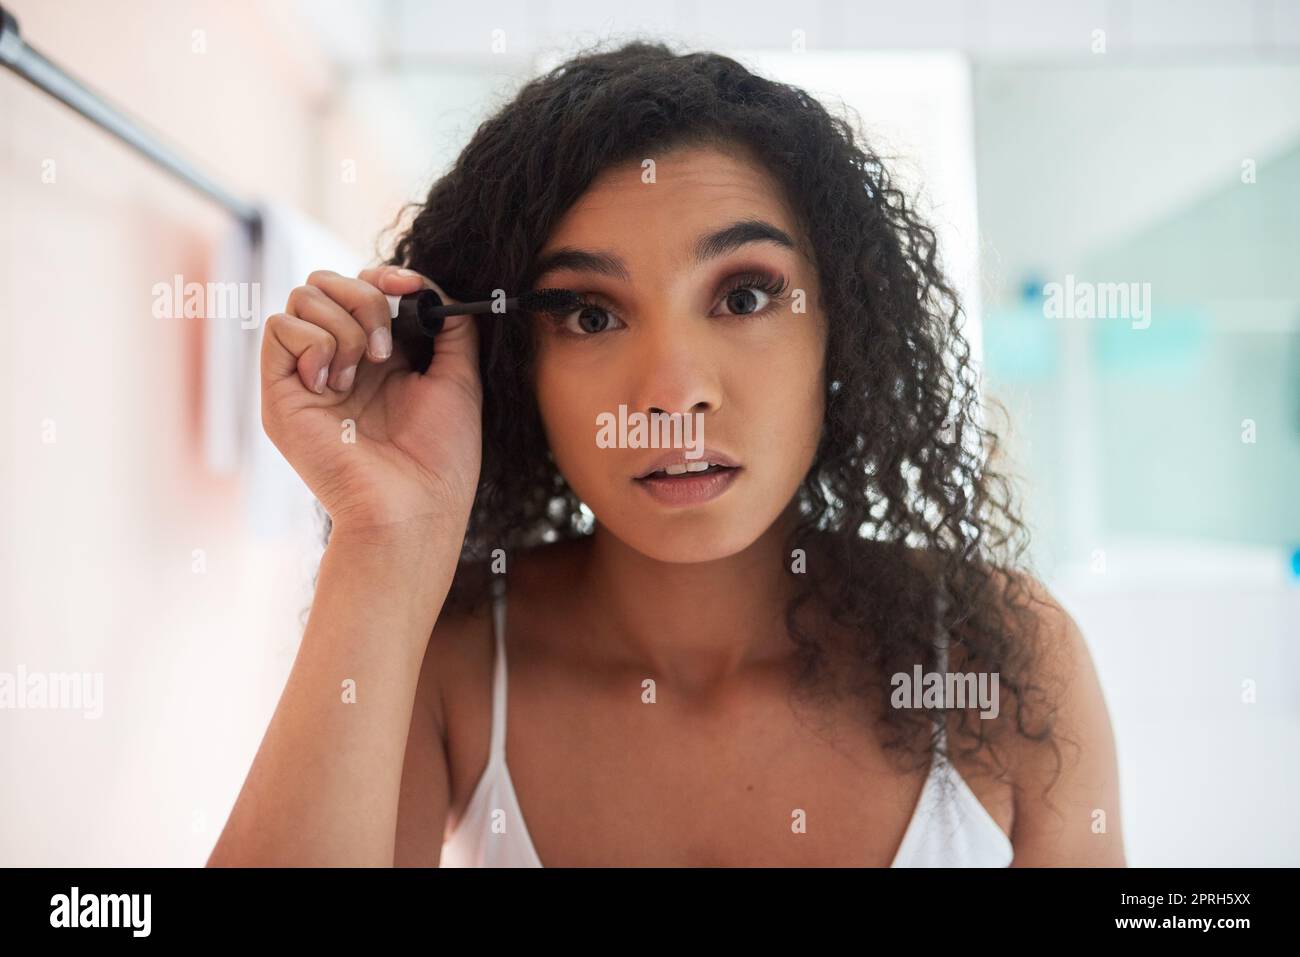 Making her eyes pop. Portrait of an attractive young woman applying mascara in the bathroom. Stock Photo